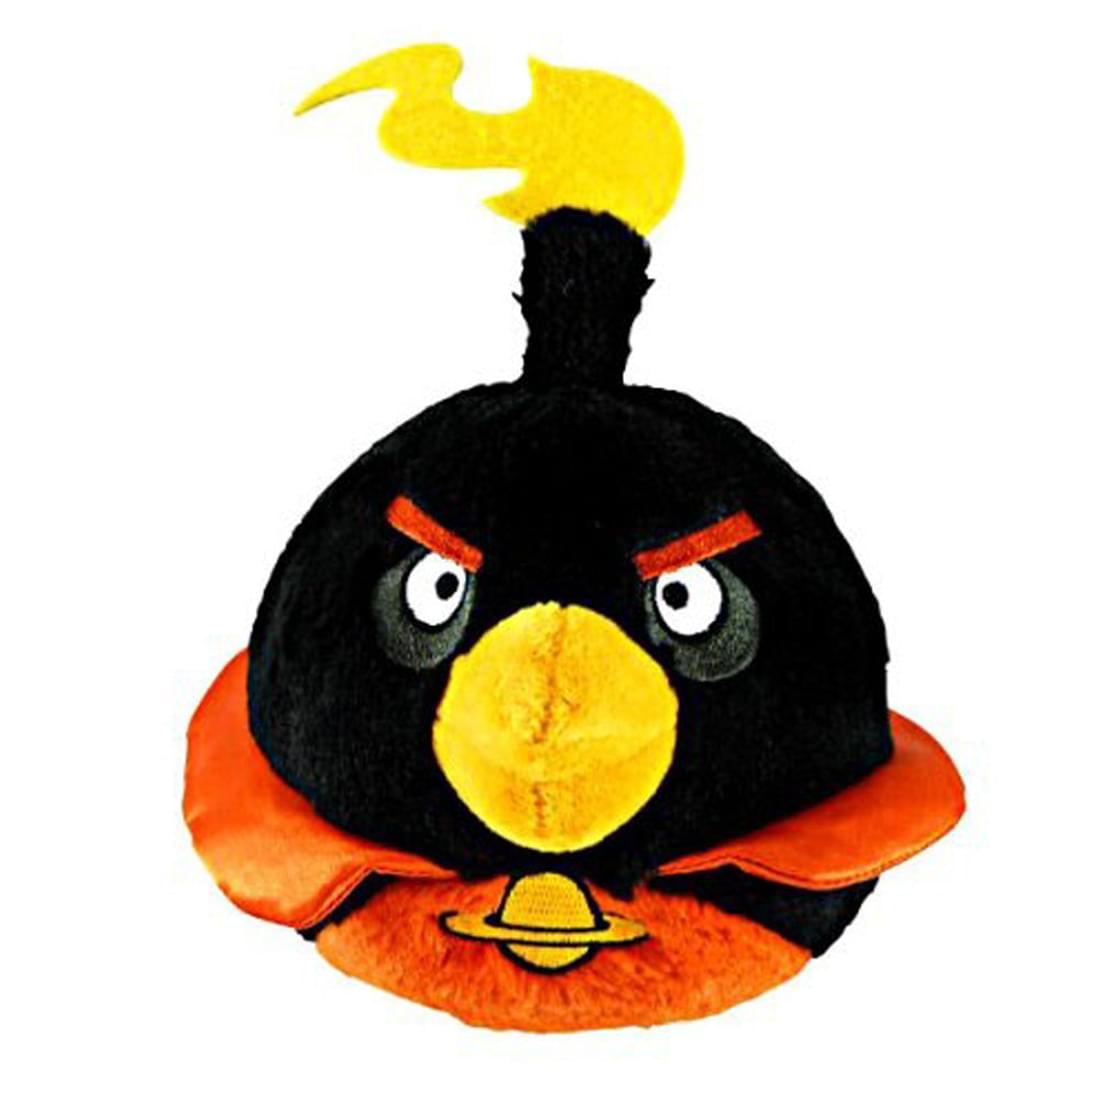 Angry Birds 5" Black Space Bird Plush Officially Licensed